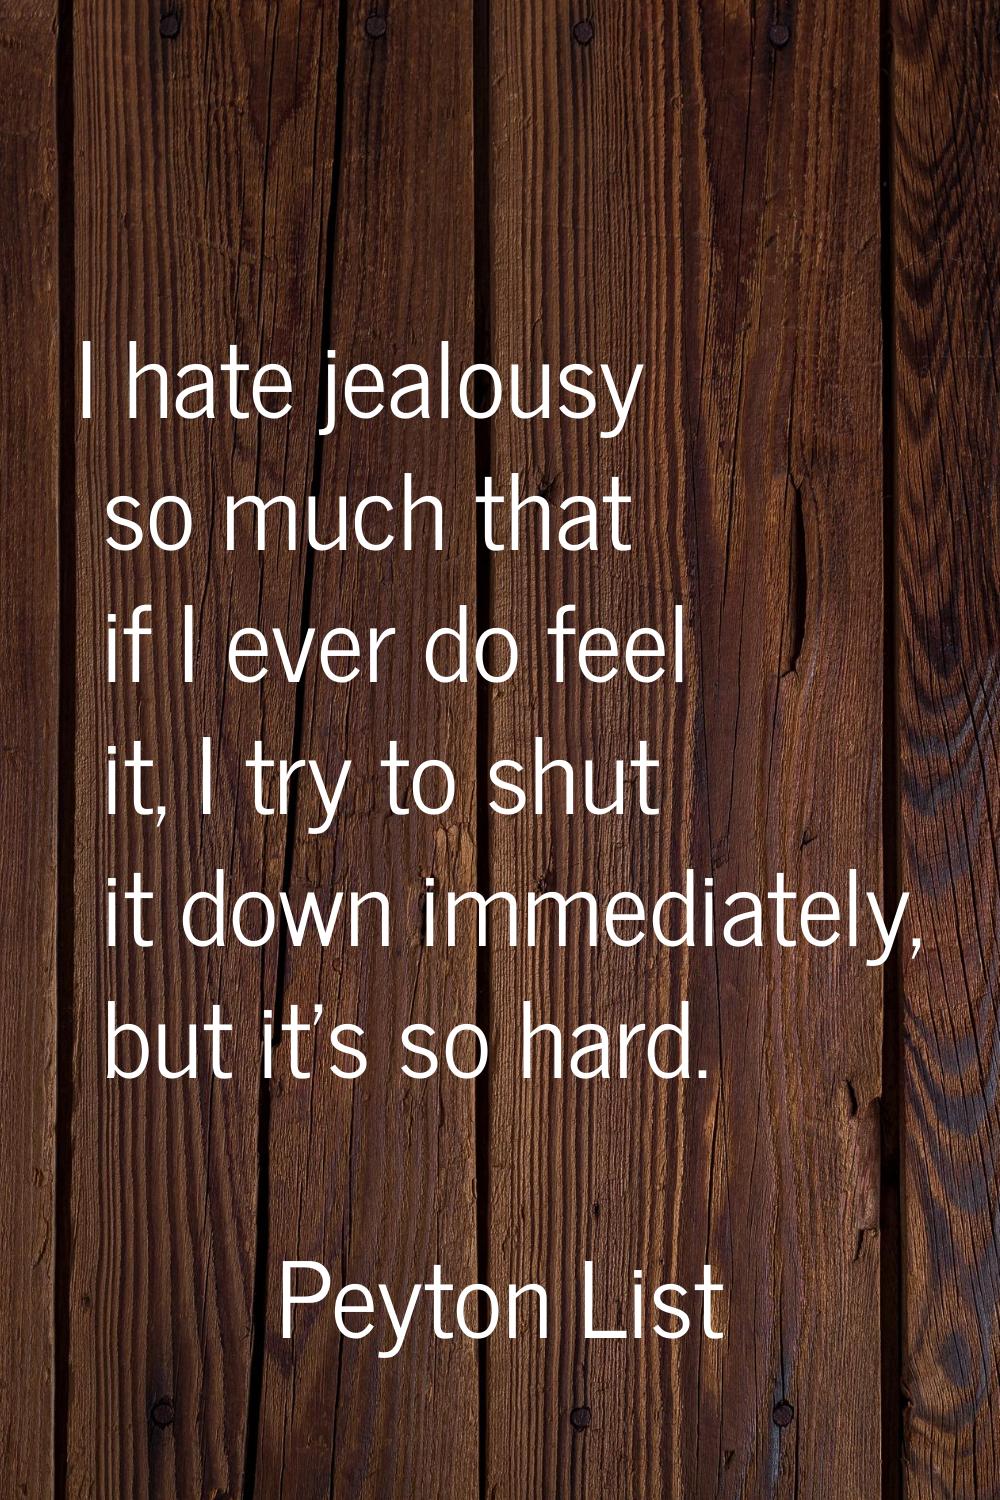 I hate jealousy so much that if I ever do feel it, I try to shut it down immediately, but it's so h